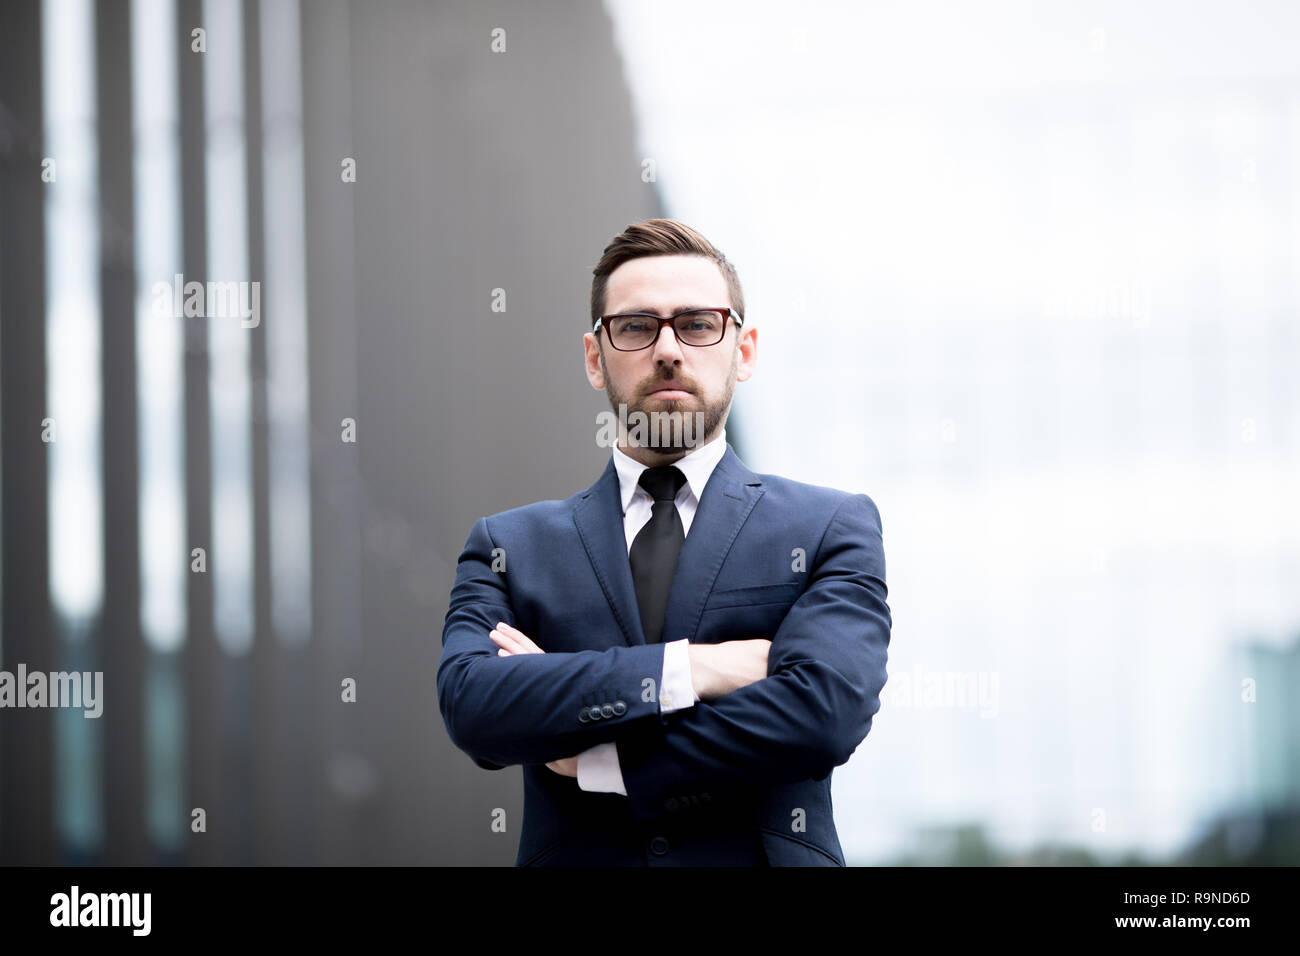 Confident businessman standing with arms crossed Stock Photo